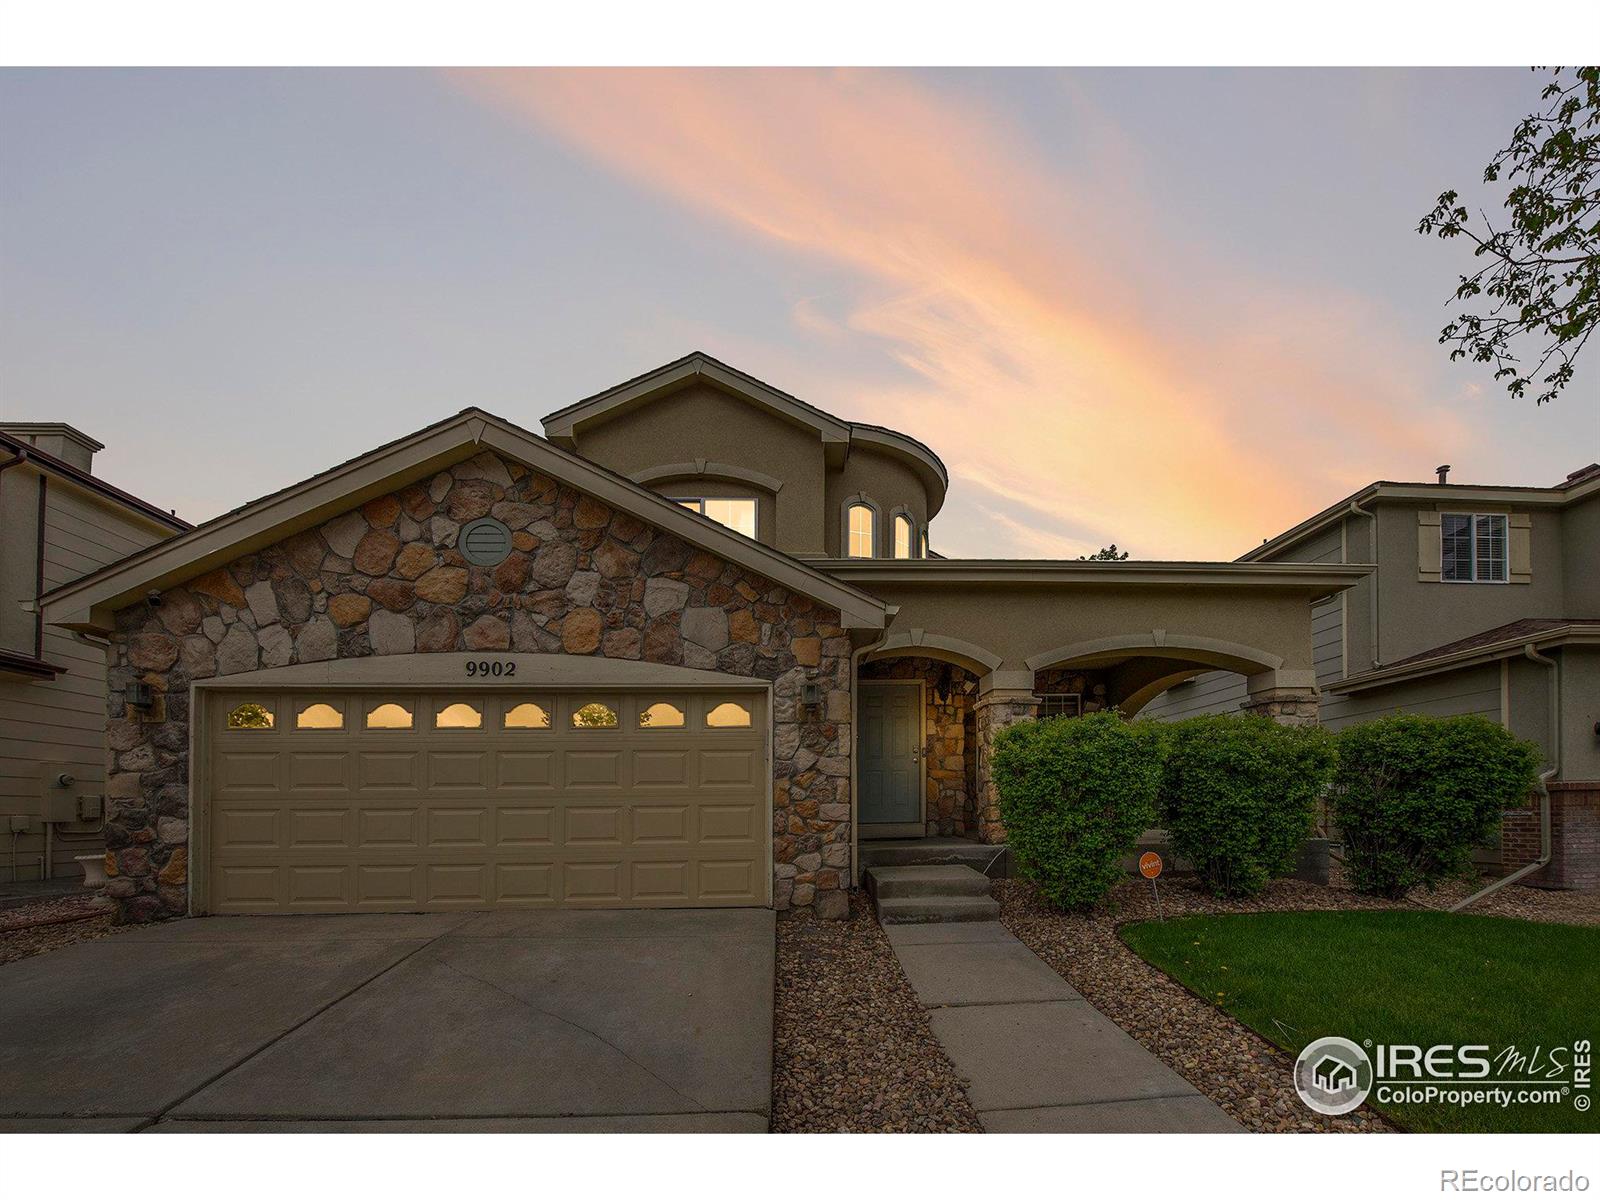 9902 E 112th Place, commerce city MLS: 4567891004205 Beds: 3 Baths: 4 Price: $589,000